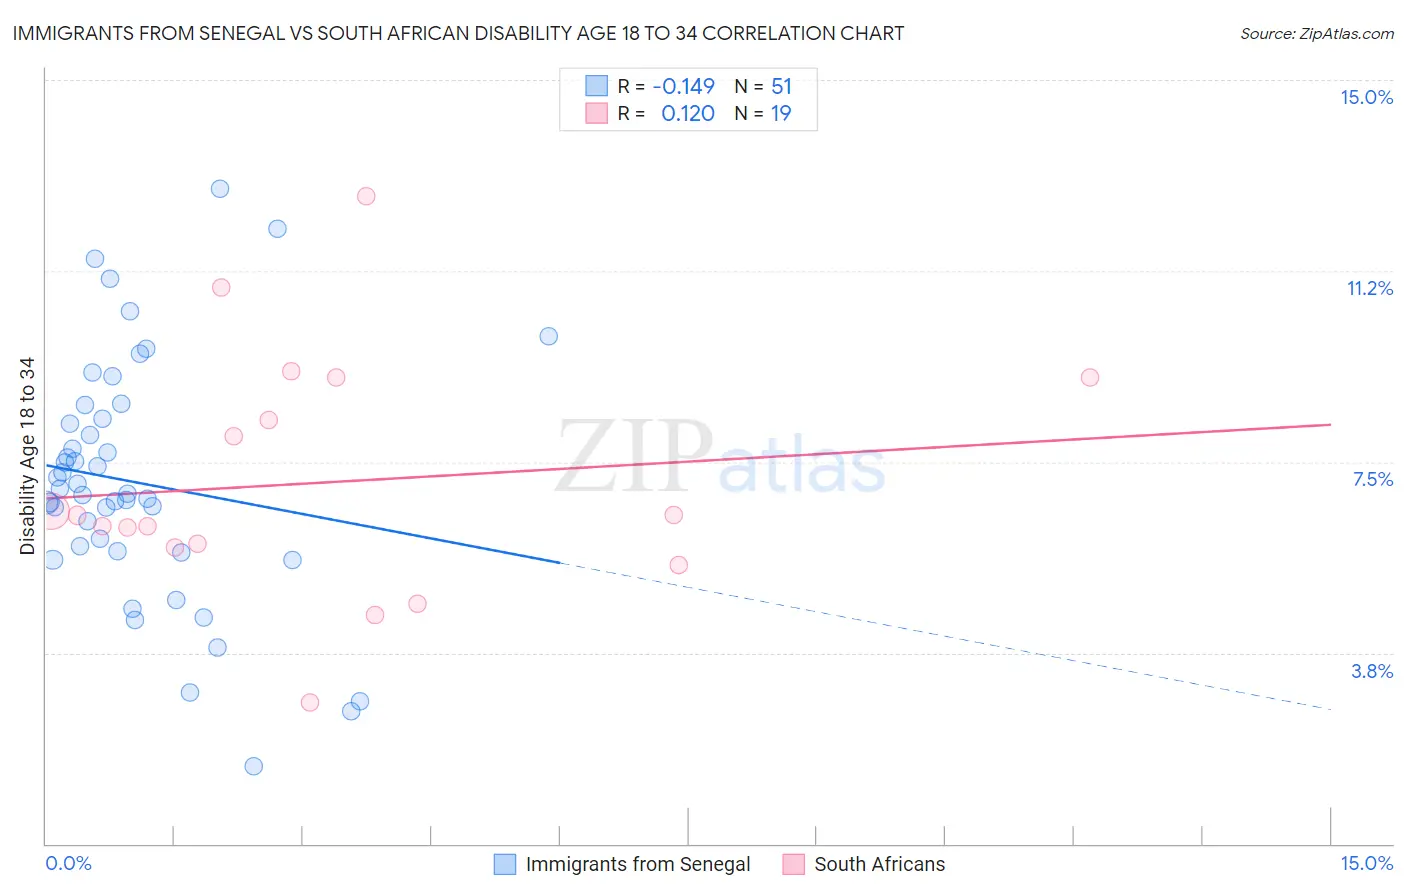 Immigrants from Senegal vs South African Disability Age 18 to 34